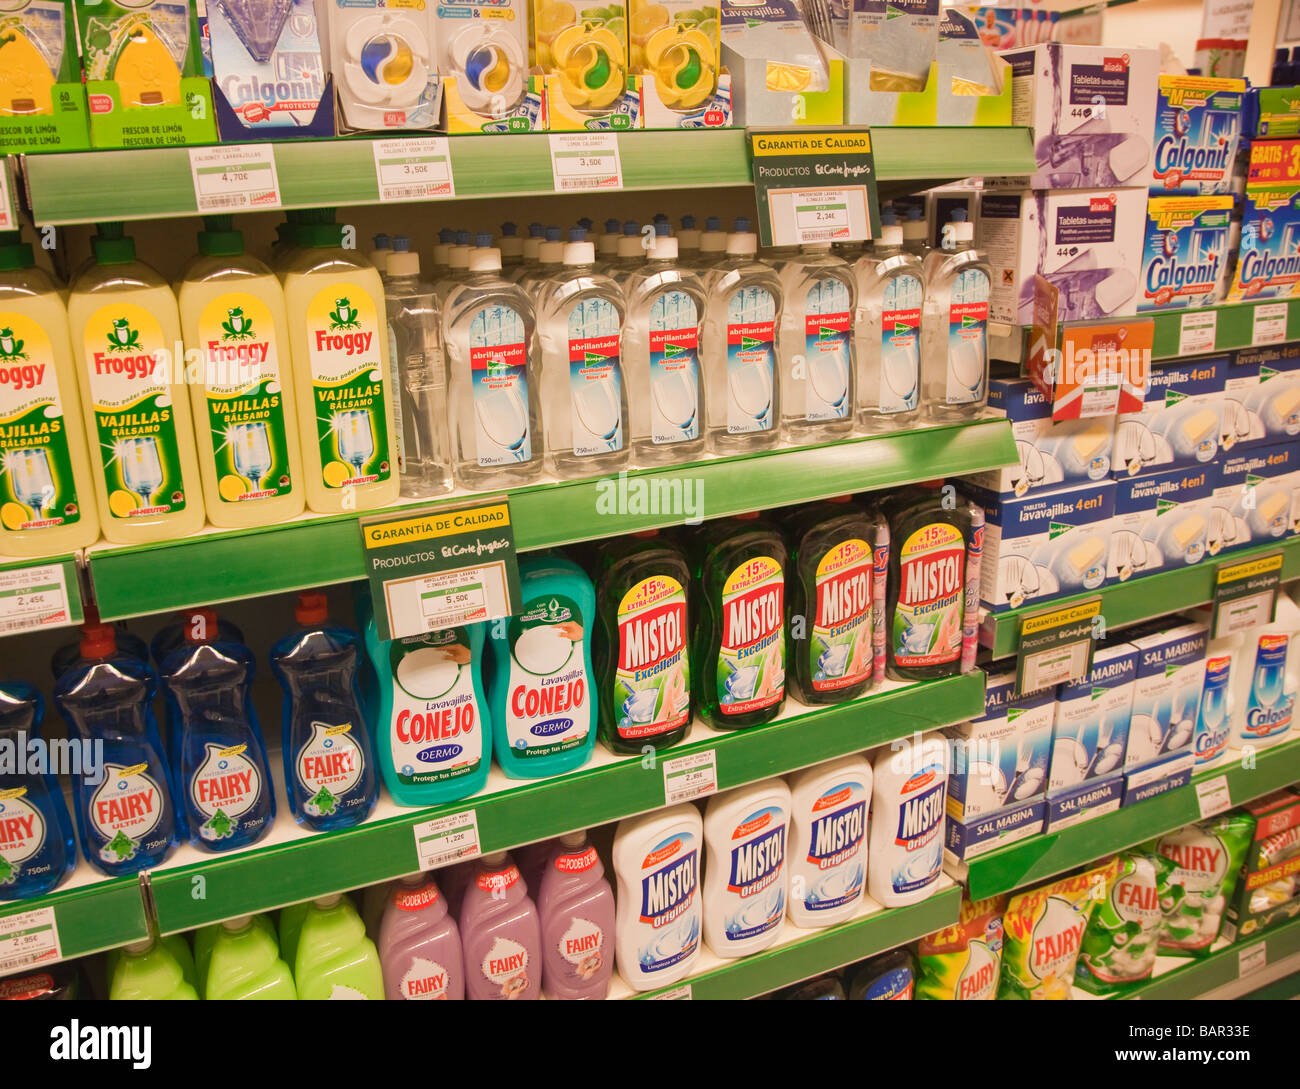 Dish washing and dish washing machine liquids on supermarket shelves in a SuperCor outlet of El Corte Ingles Spain Stock Photo